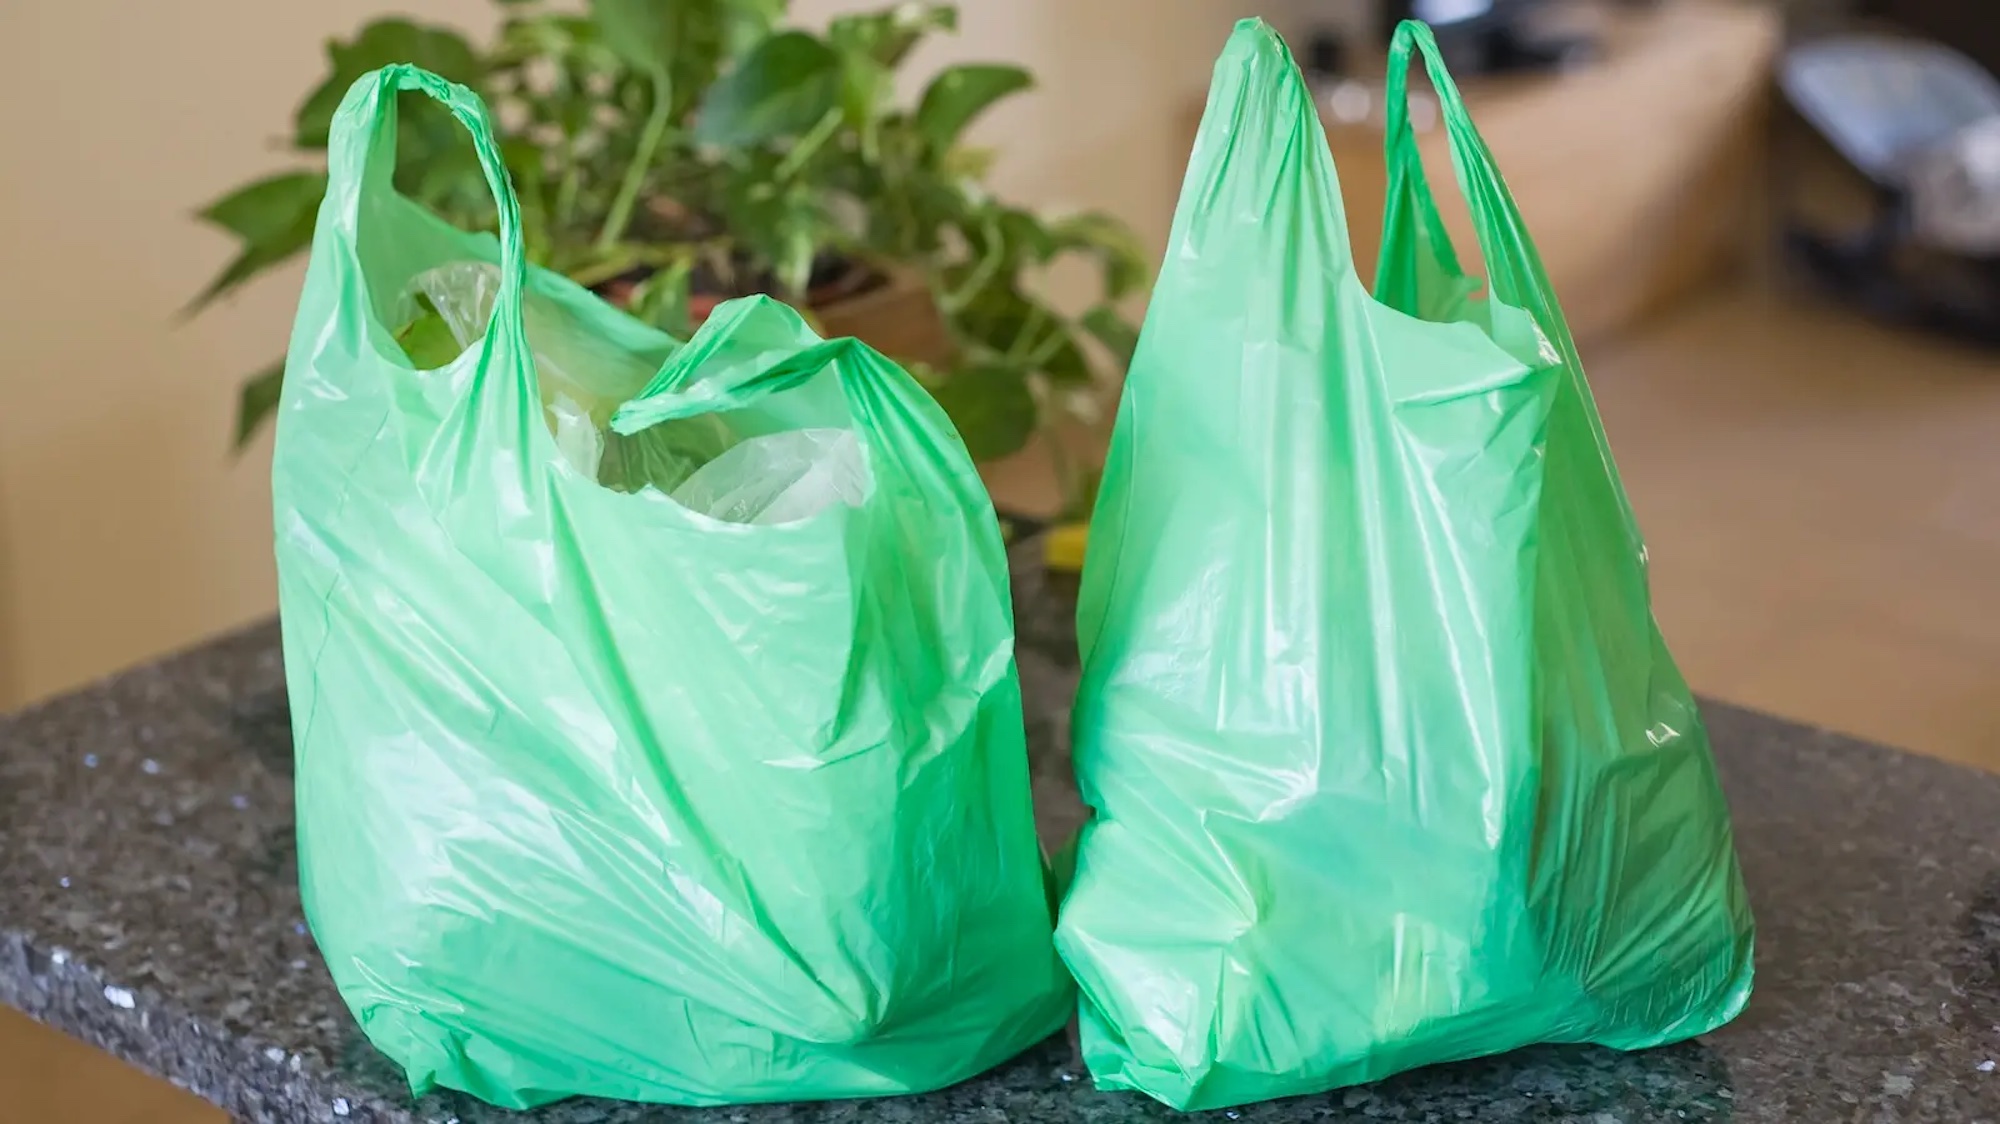 Colorado plastic bag law: When they may start disappearing